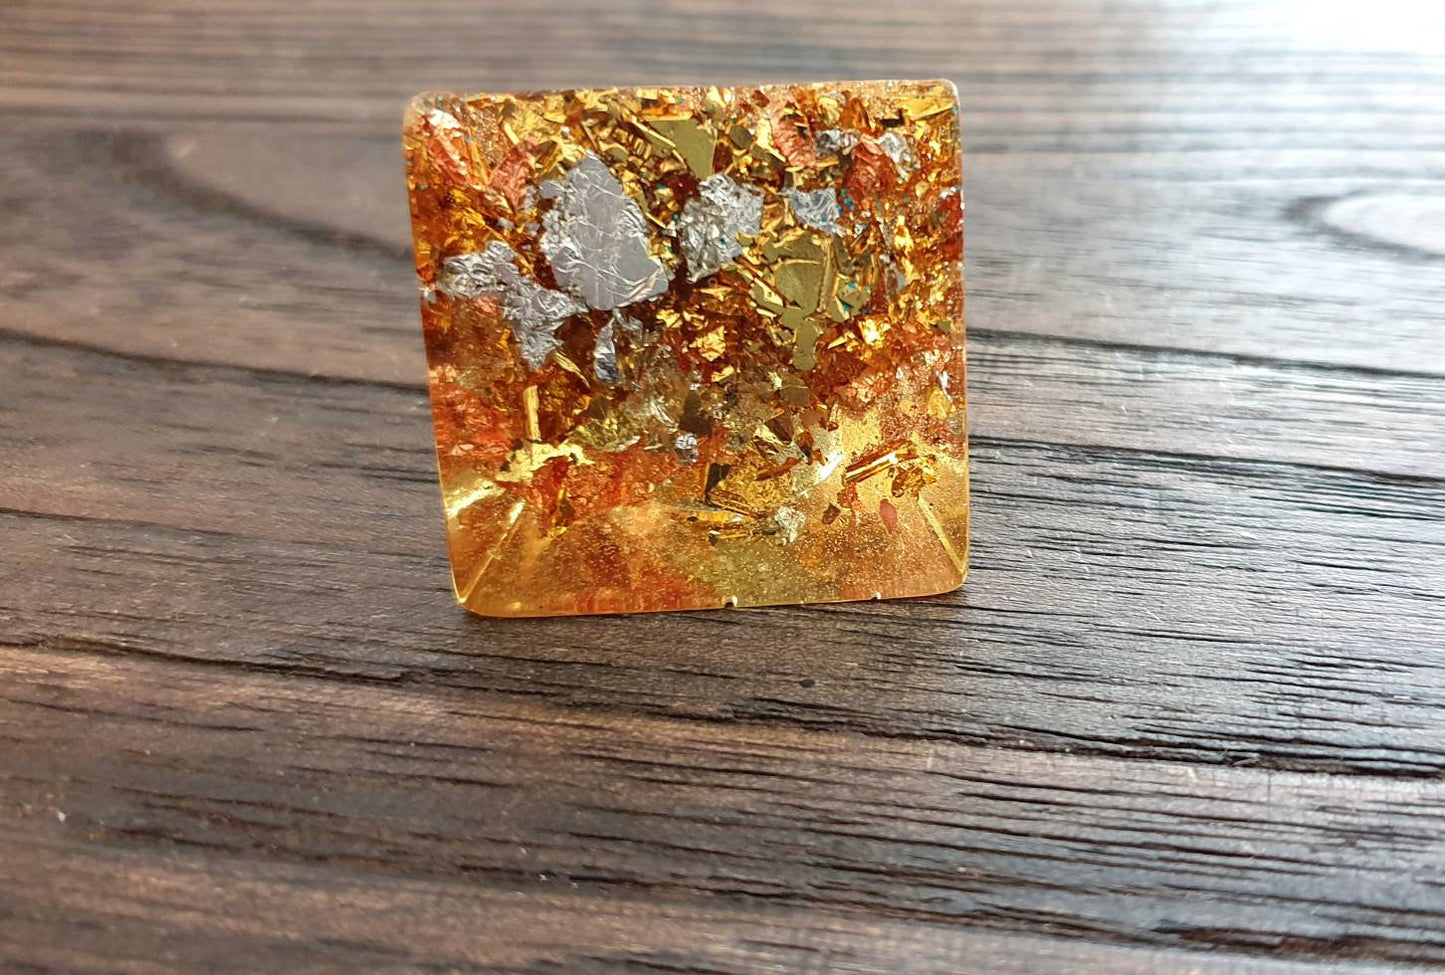 Statement Square Resin Ring, Handmade Size 7 US N AU Silver Gold Rose Gold Leaf Mix Ring